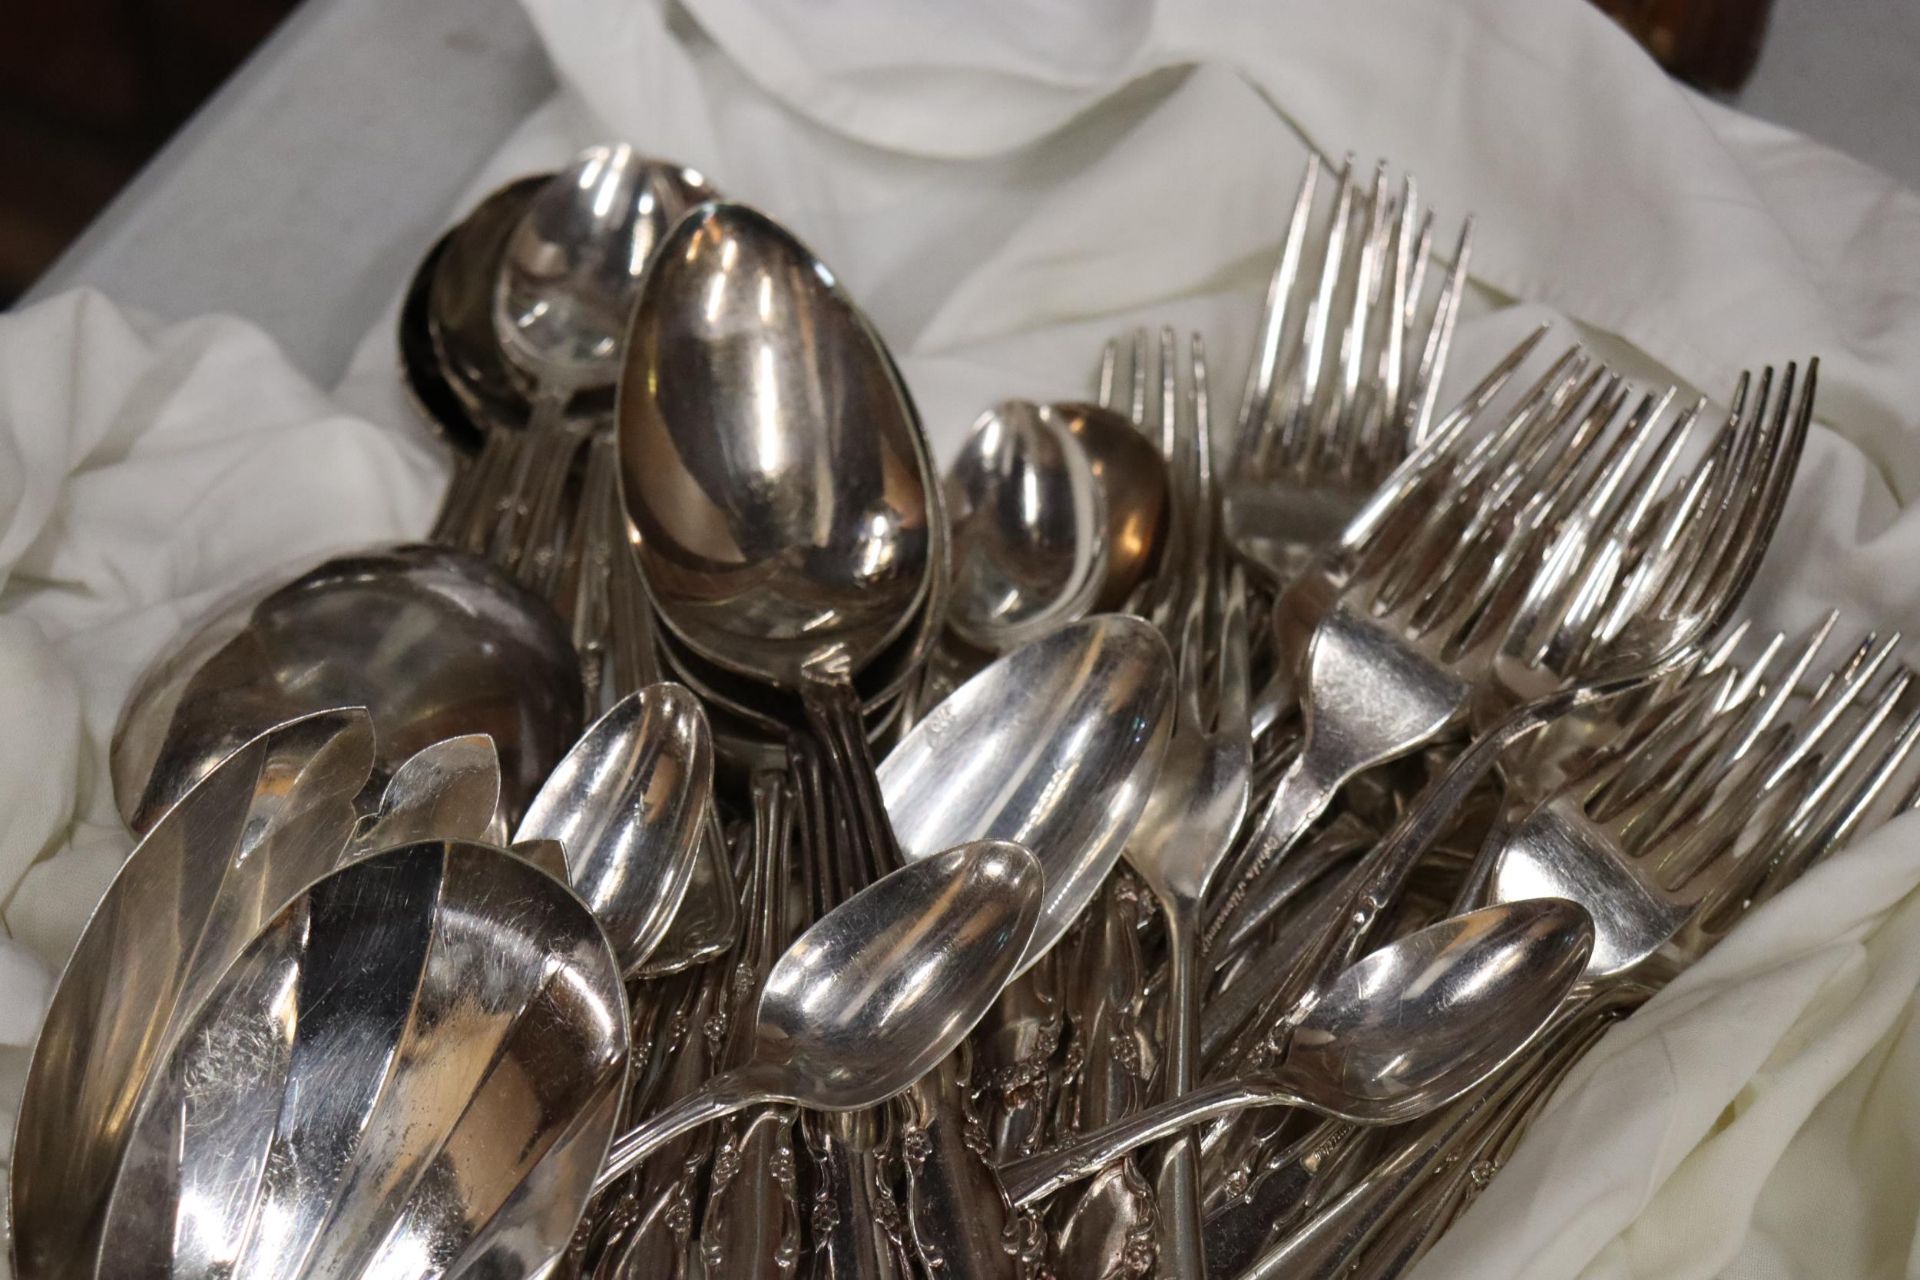 A QUANTITY OF FLATWARE, KNIVES, FORKS AND SPOONS - Image 3 of 9